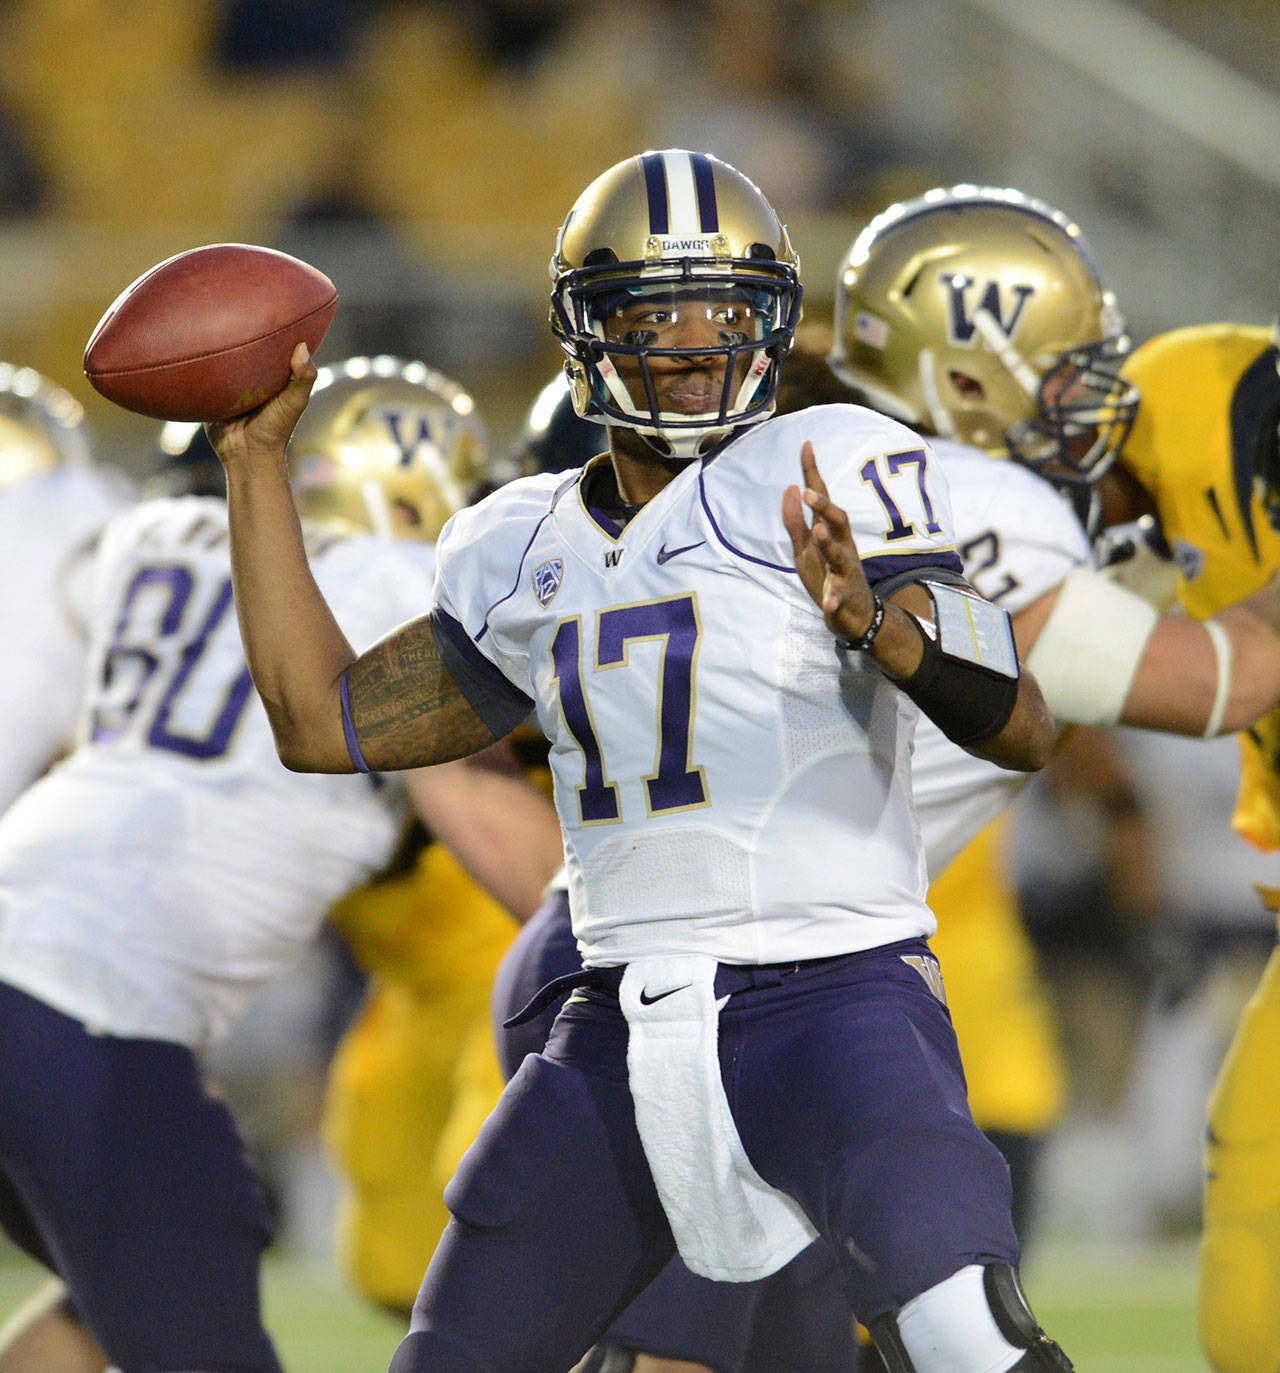 Washington quarterback Keith Price (17) passes the ball to an open receiver in the first quarter against California at Memorial Stadium in Berkeley, California, on Friday, November 2, 2012. (Doug Duran/Contra Costa Times/MCT)